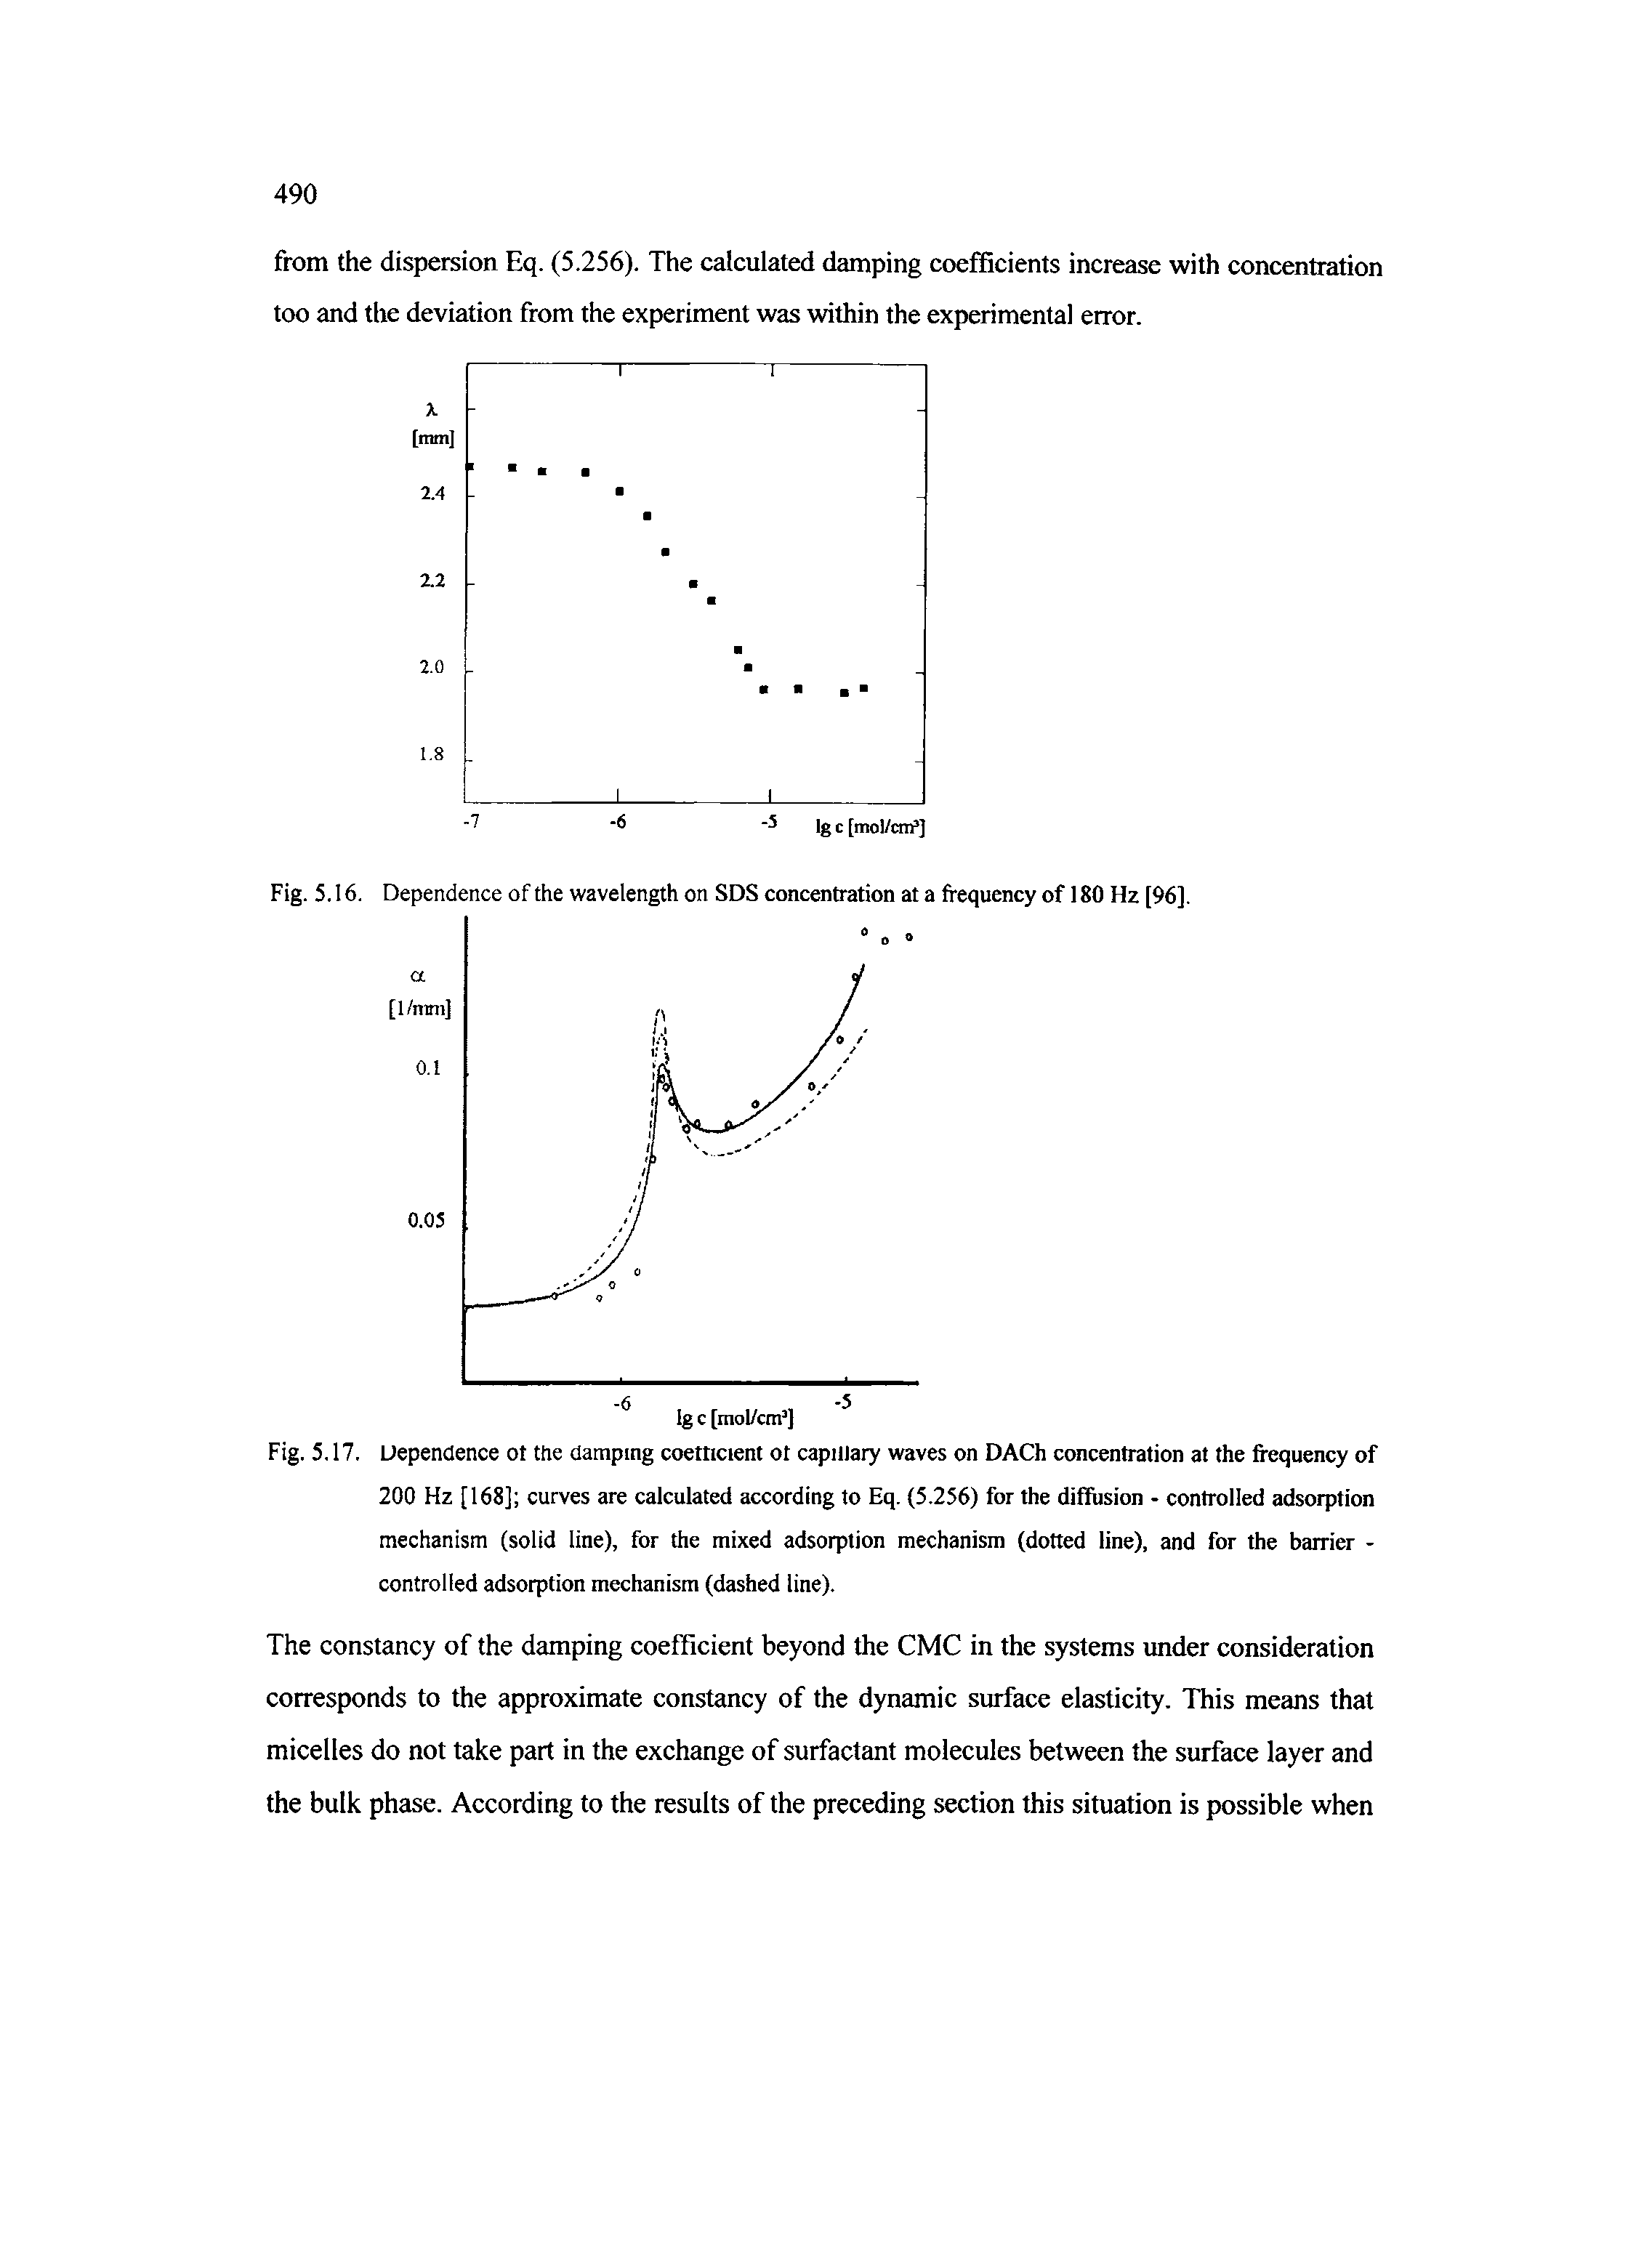 Fig. 5.17. Dependence of the damping coefficient ot capillary waves on DACh concentration at the frequency of 200 Hz [168] curves are calculated according to Eq. (5.256) for the diffusion - controlled adsorption mechanism (solid line), for the mixed adsorption mechanism (dotted line), and for the barrier -controlled adsorption mechanism (dashed line).